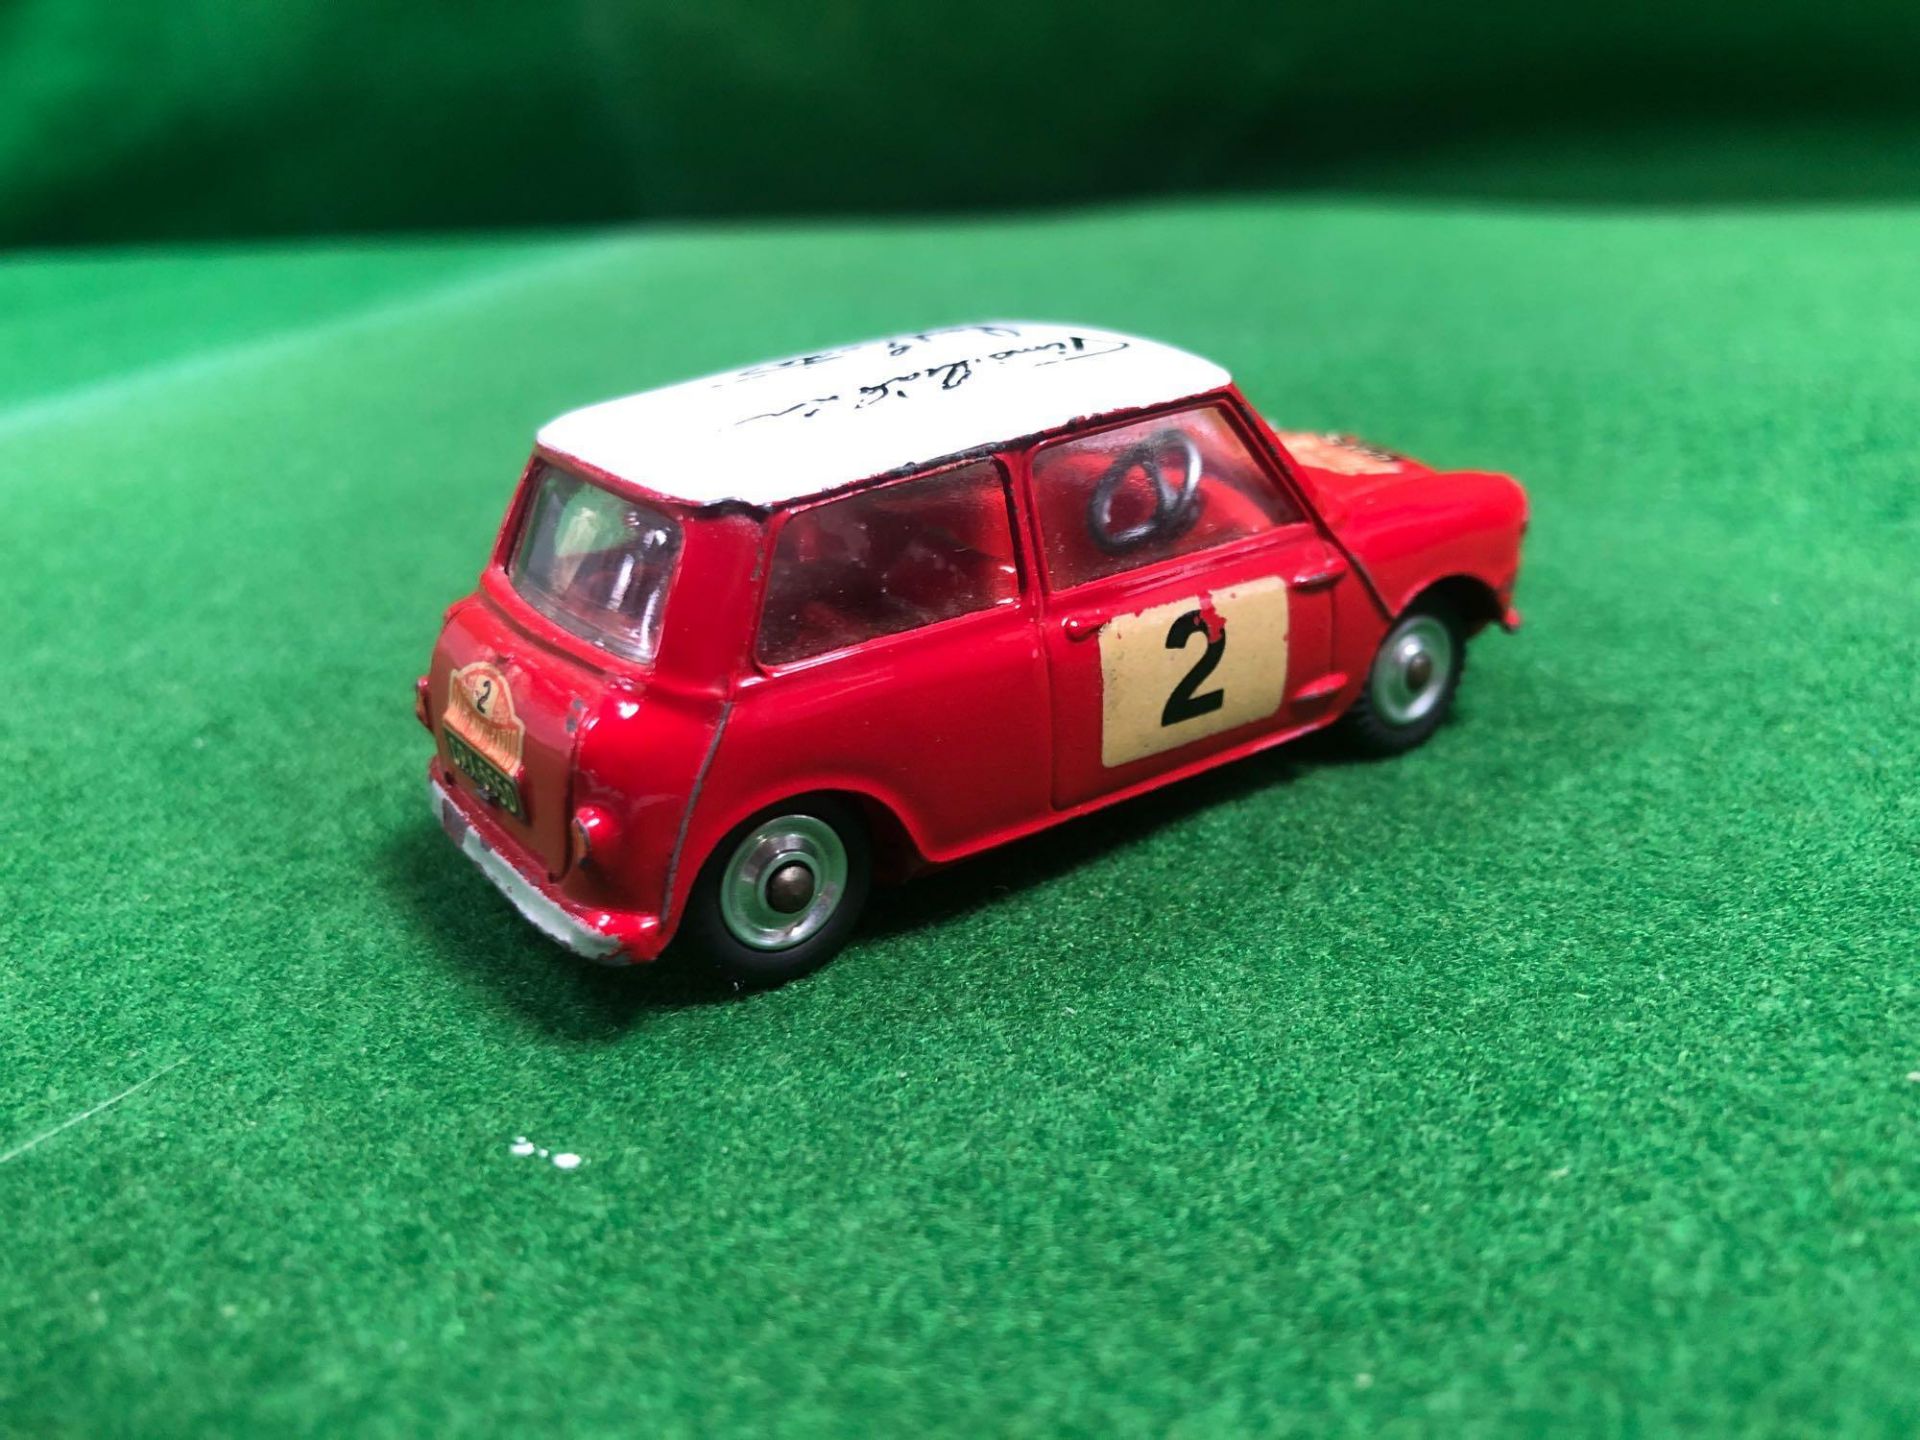 Corgi 321 Diecast BMC Mini Cooper S Monte Carlo Rally Car In Red With White Roof With Racing - Image 3 of 3